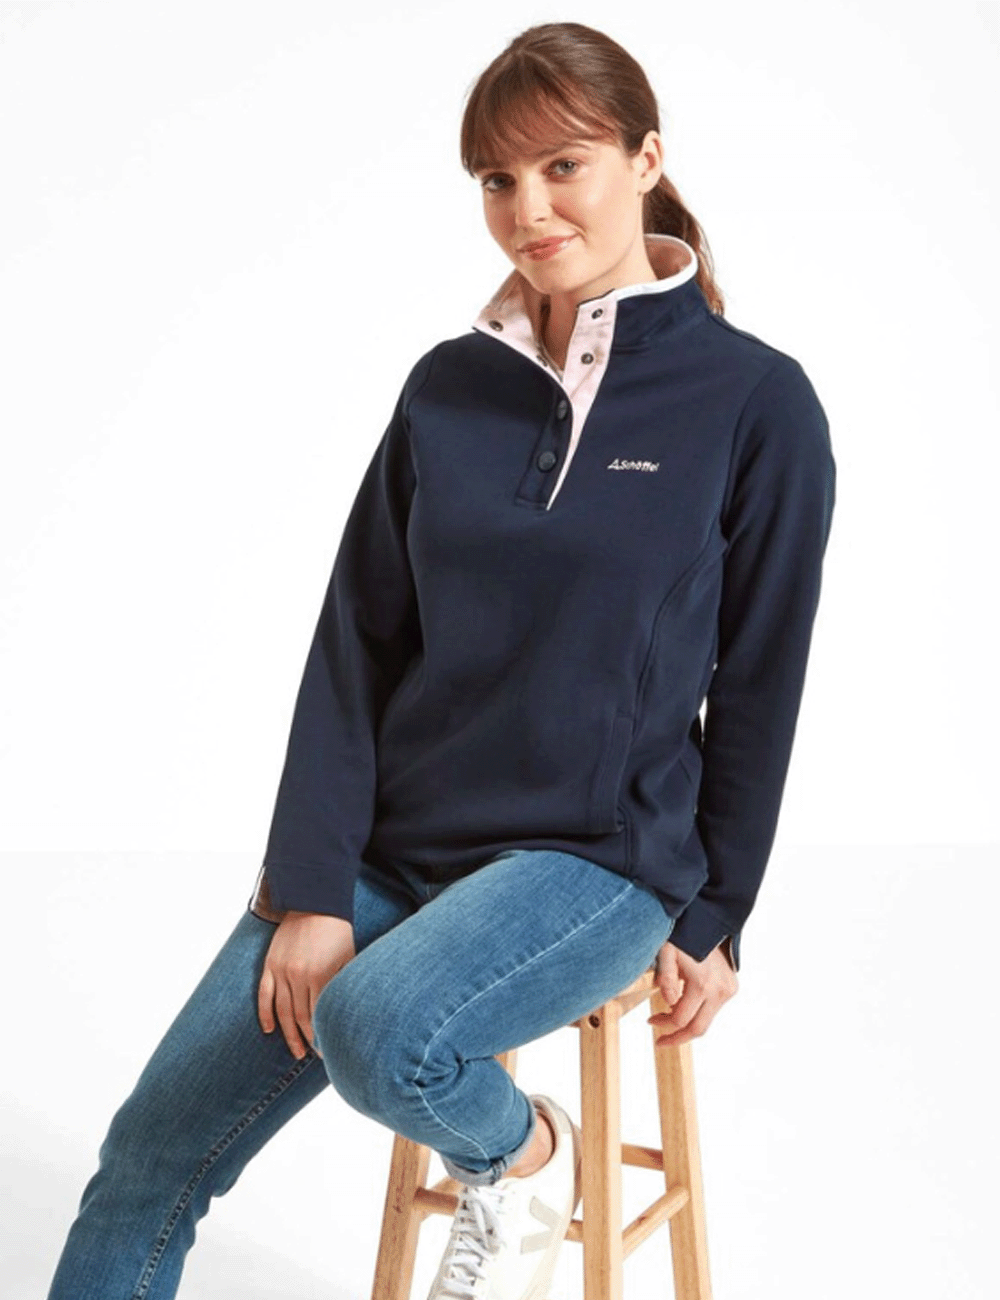 Woman sitting on a stool wearing the Steephill Cove Sweatshirt in Navy